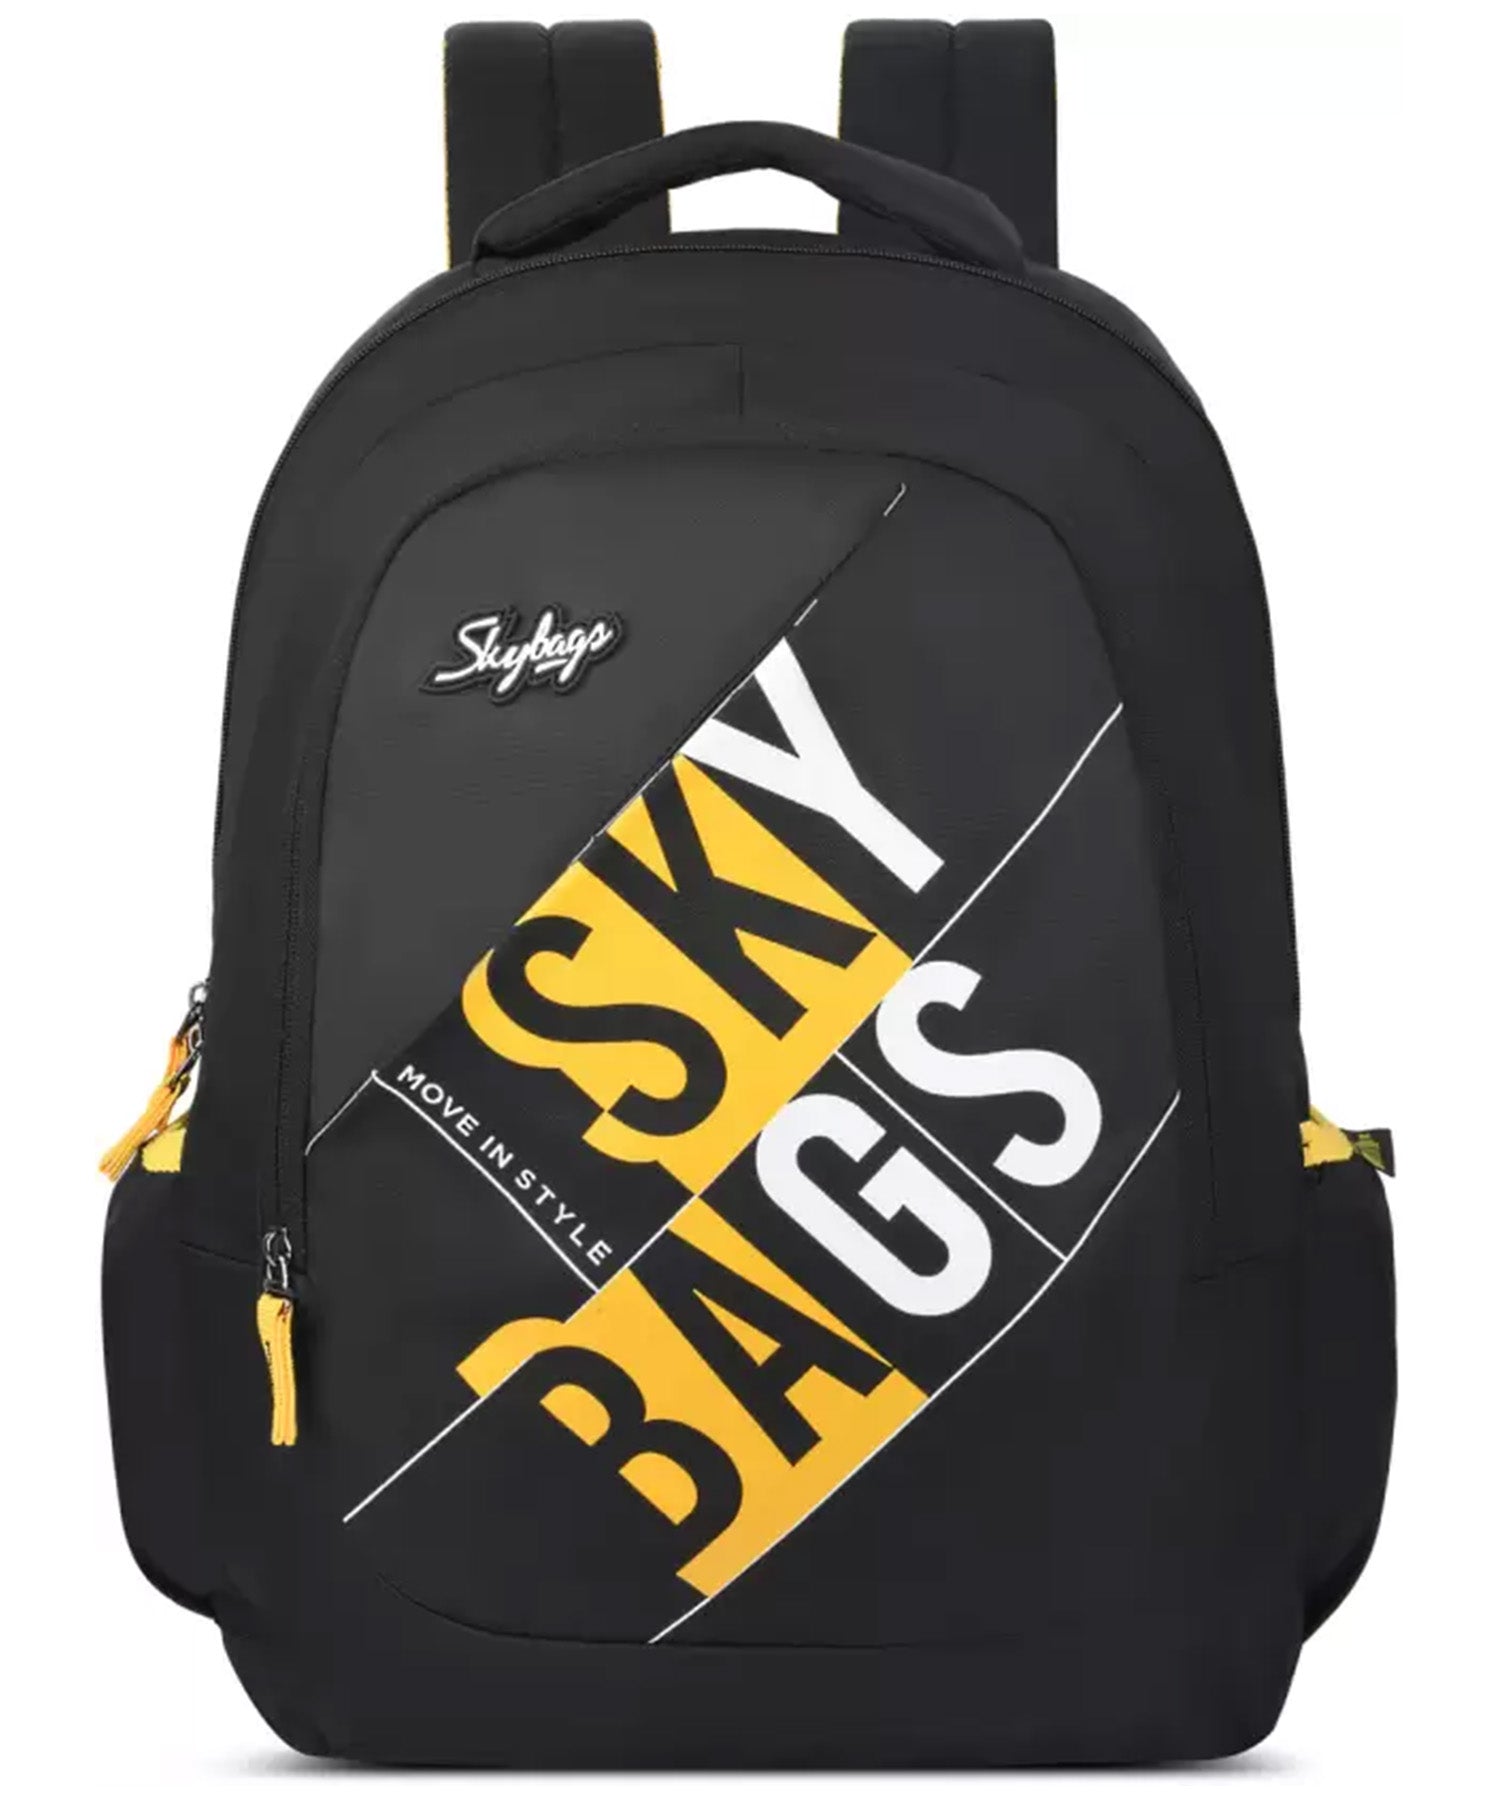 Skybags Backpack Stylish Black, 28L Capacity